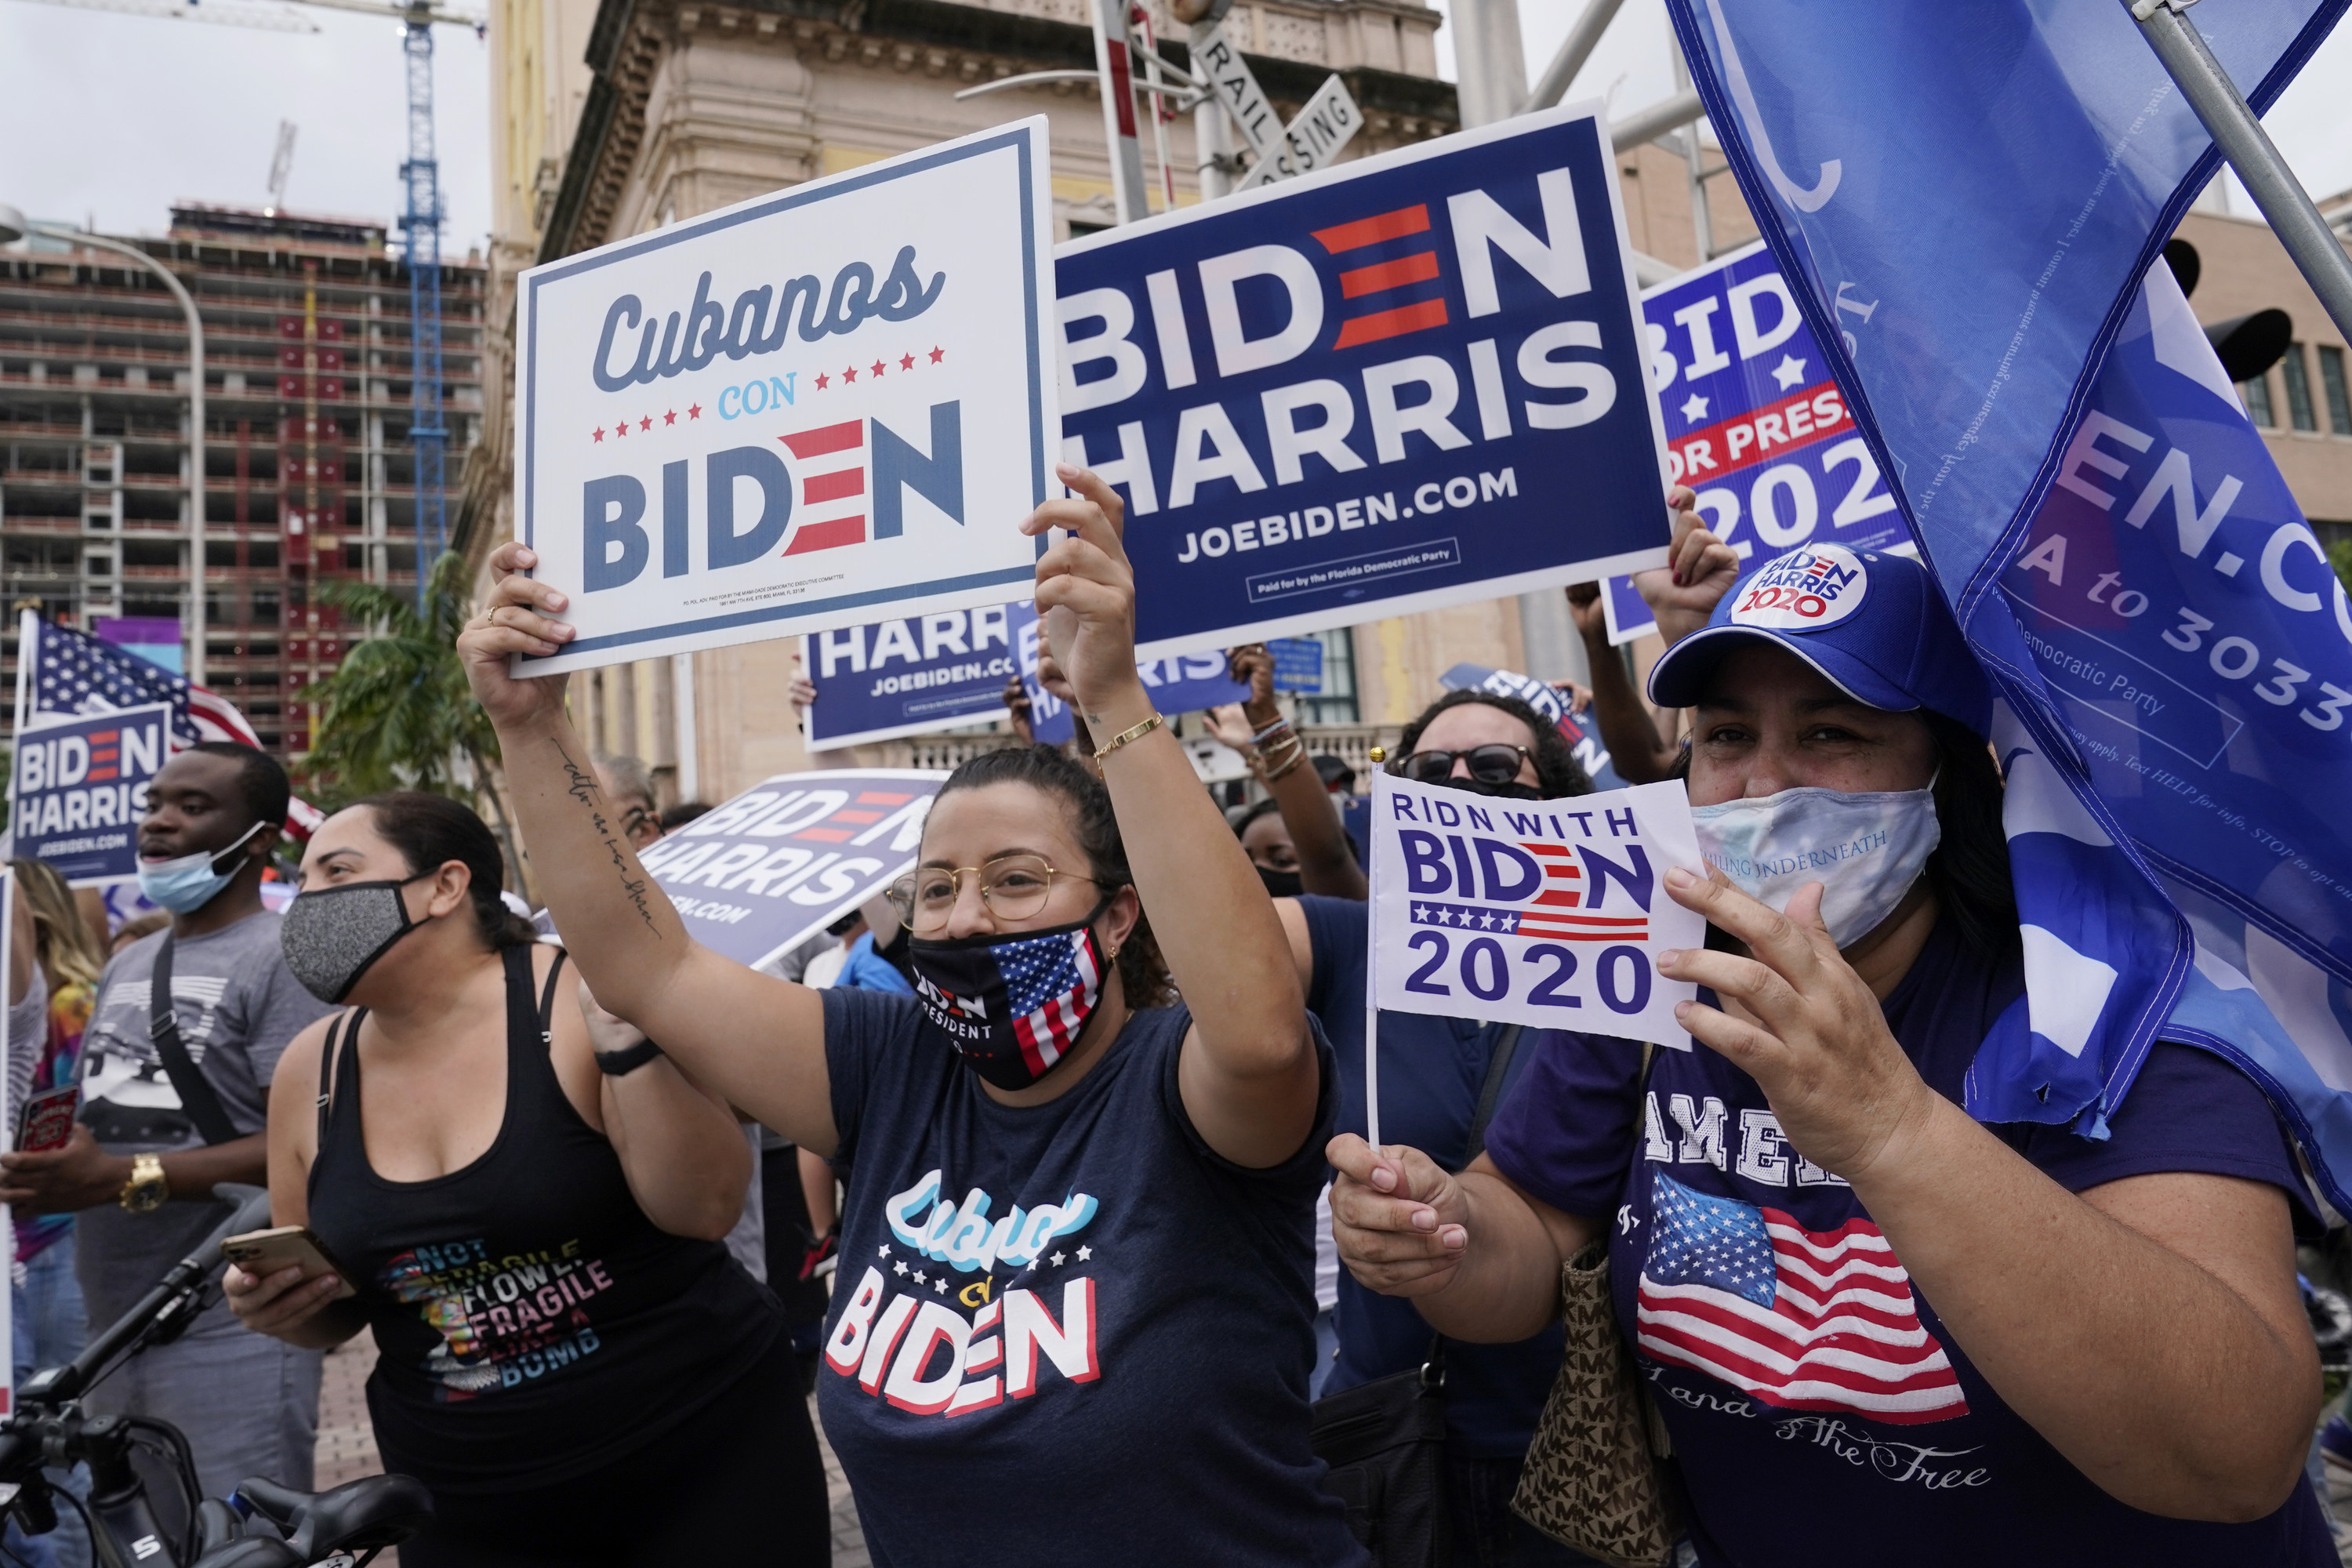 Someone holds up a sign that says &quot;Cubanos con Biden&quot;